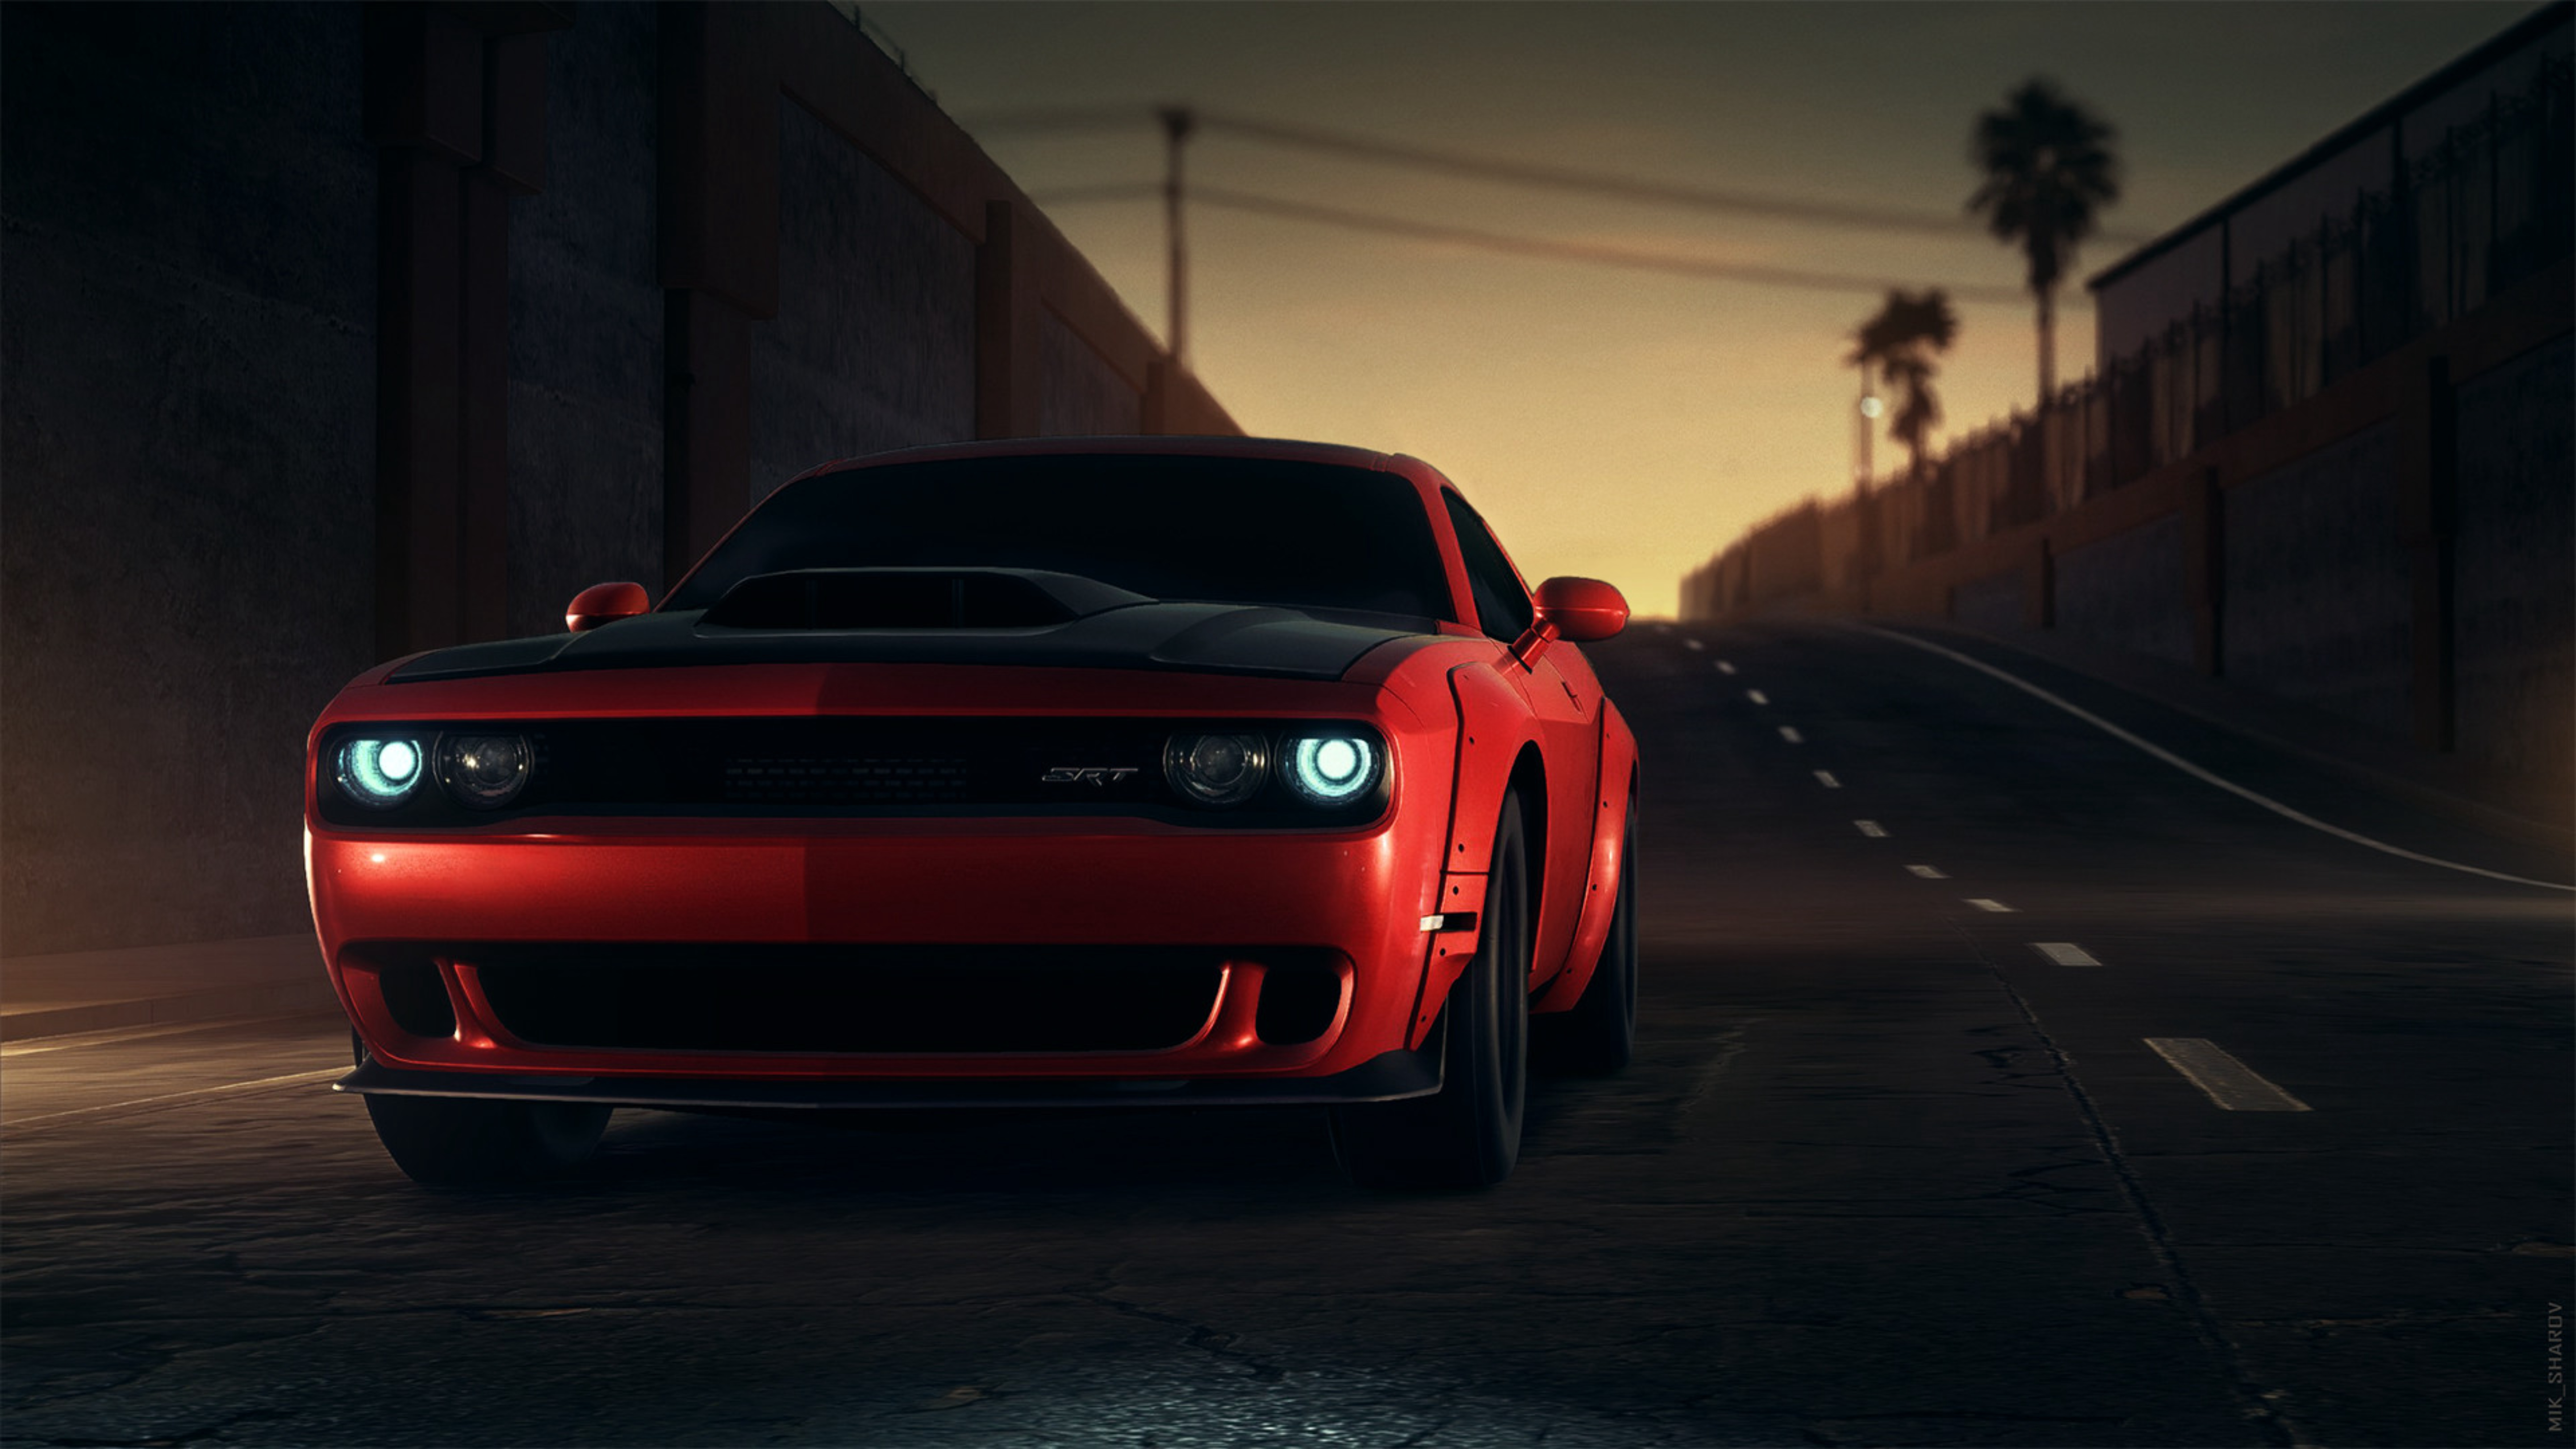 cars, front view, sports car, headlights, lights, dodge srt, dodge, red, sports Free Stock Photo